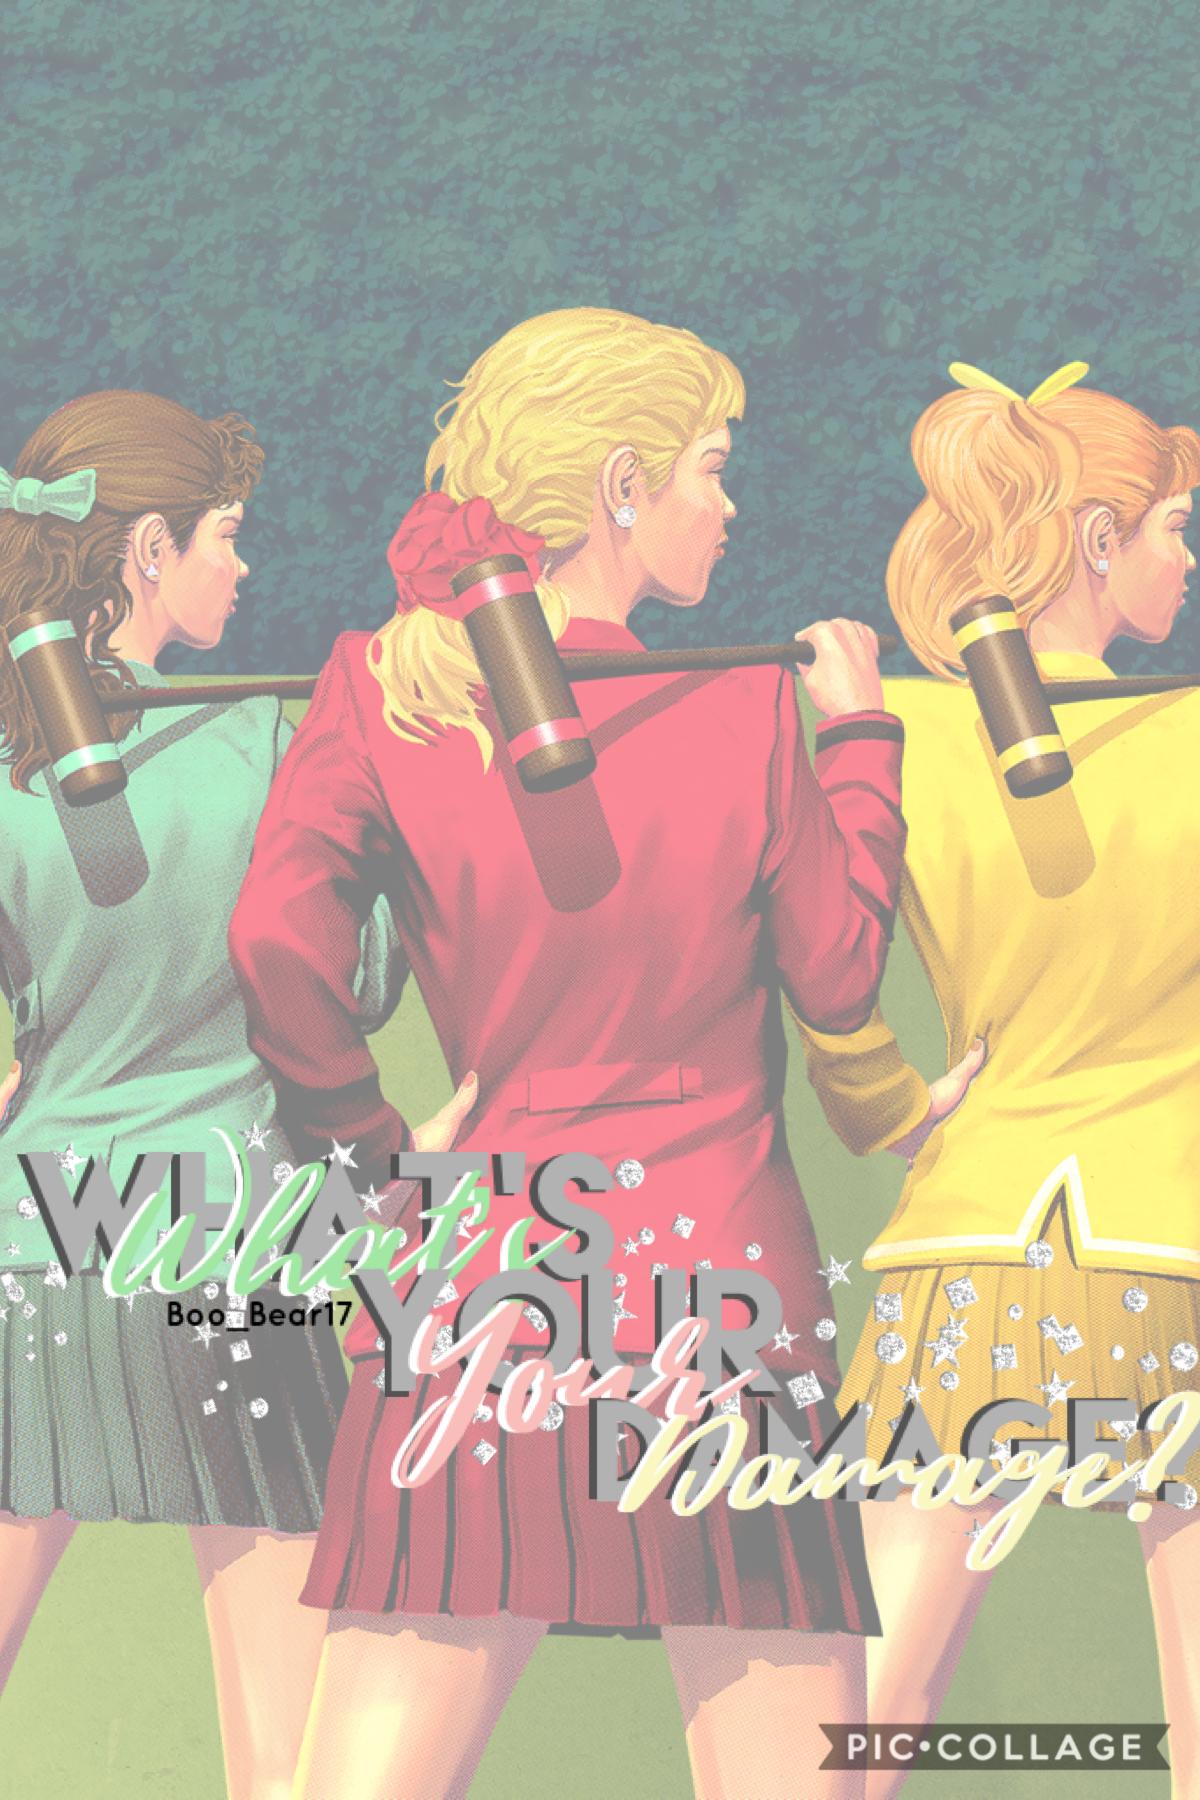 👑what’s your damage?👑
•I’m in love with heathers, the movie, the musical, everything
•someone plz rp with me, I have so many plot ideas
•song rec: Foolsong by Still Woozy 